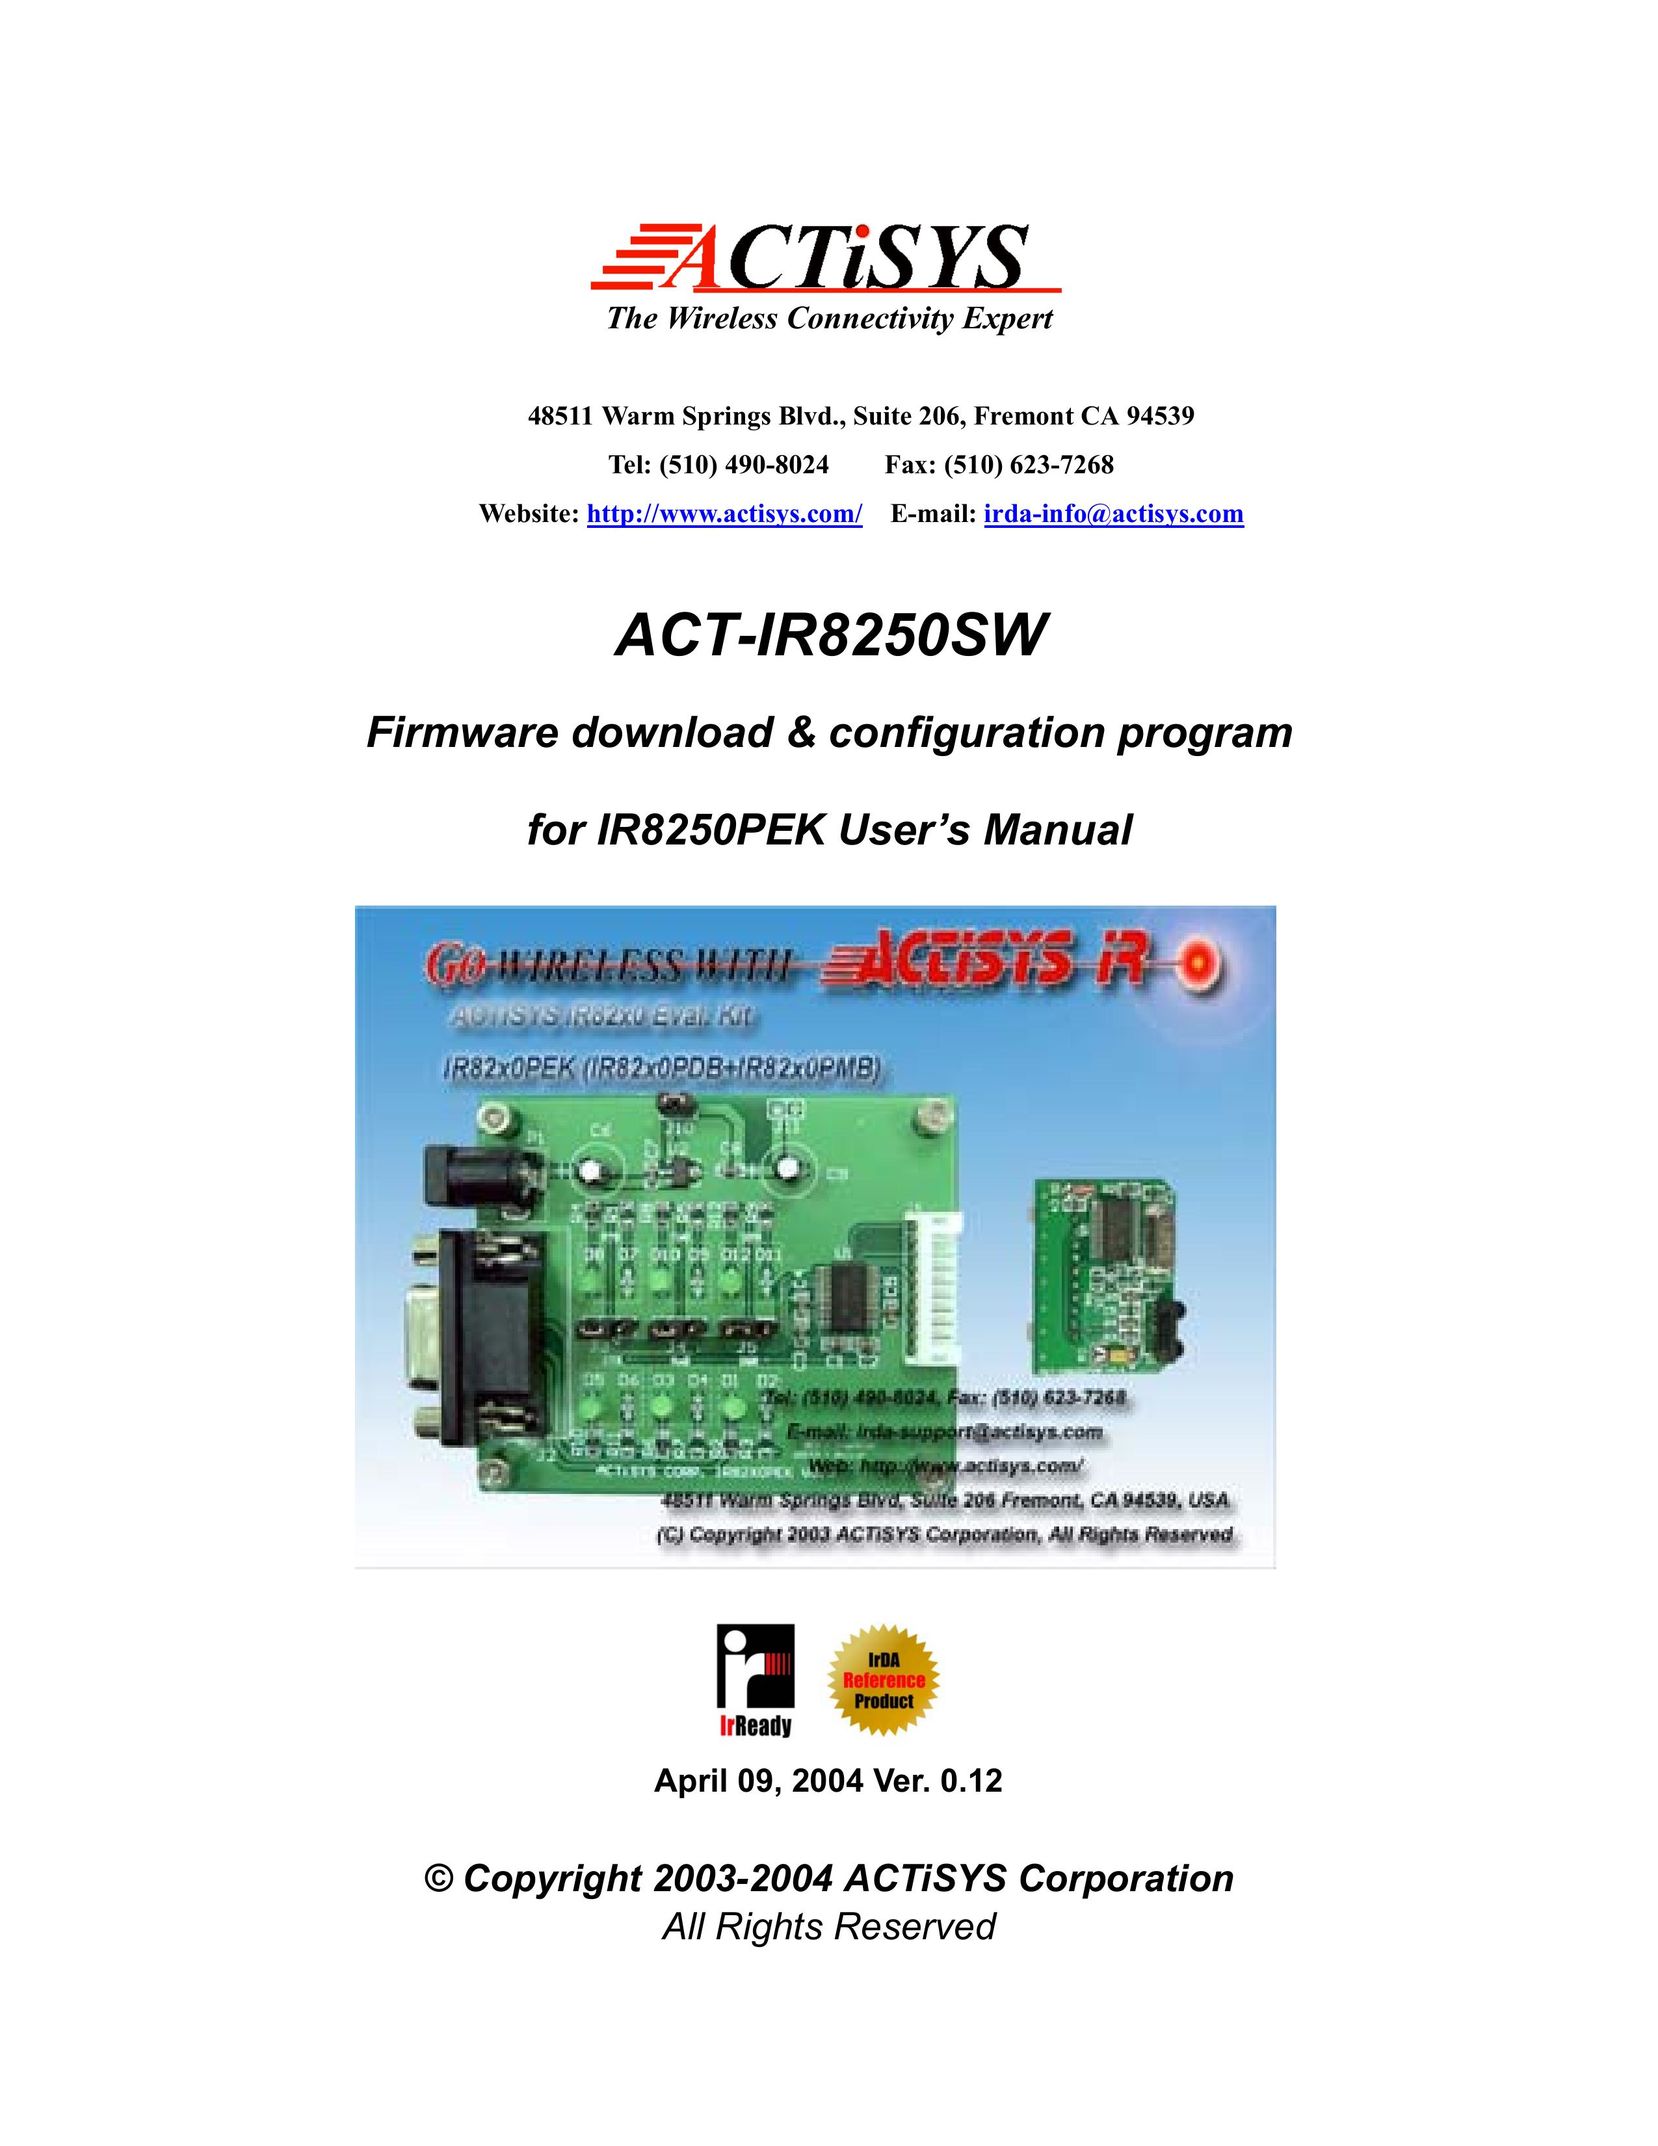 ACTiSYS ACT-IR8250SW Network Card User Manual (Page 1)